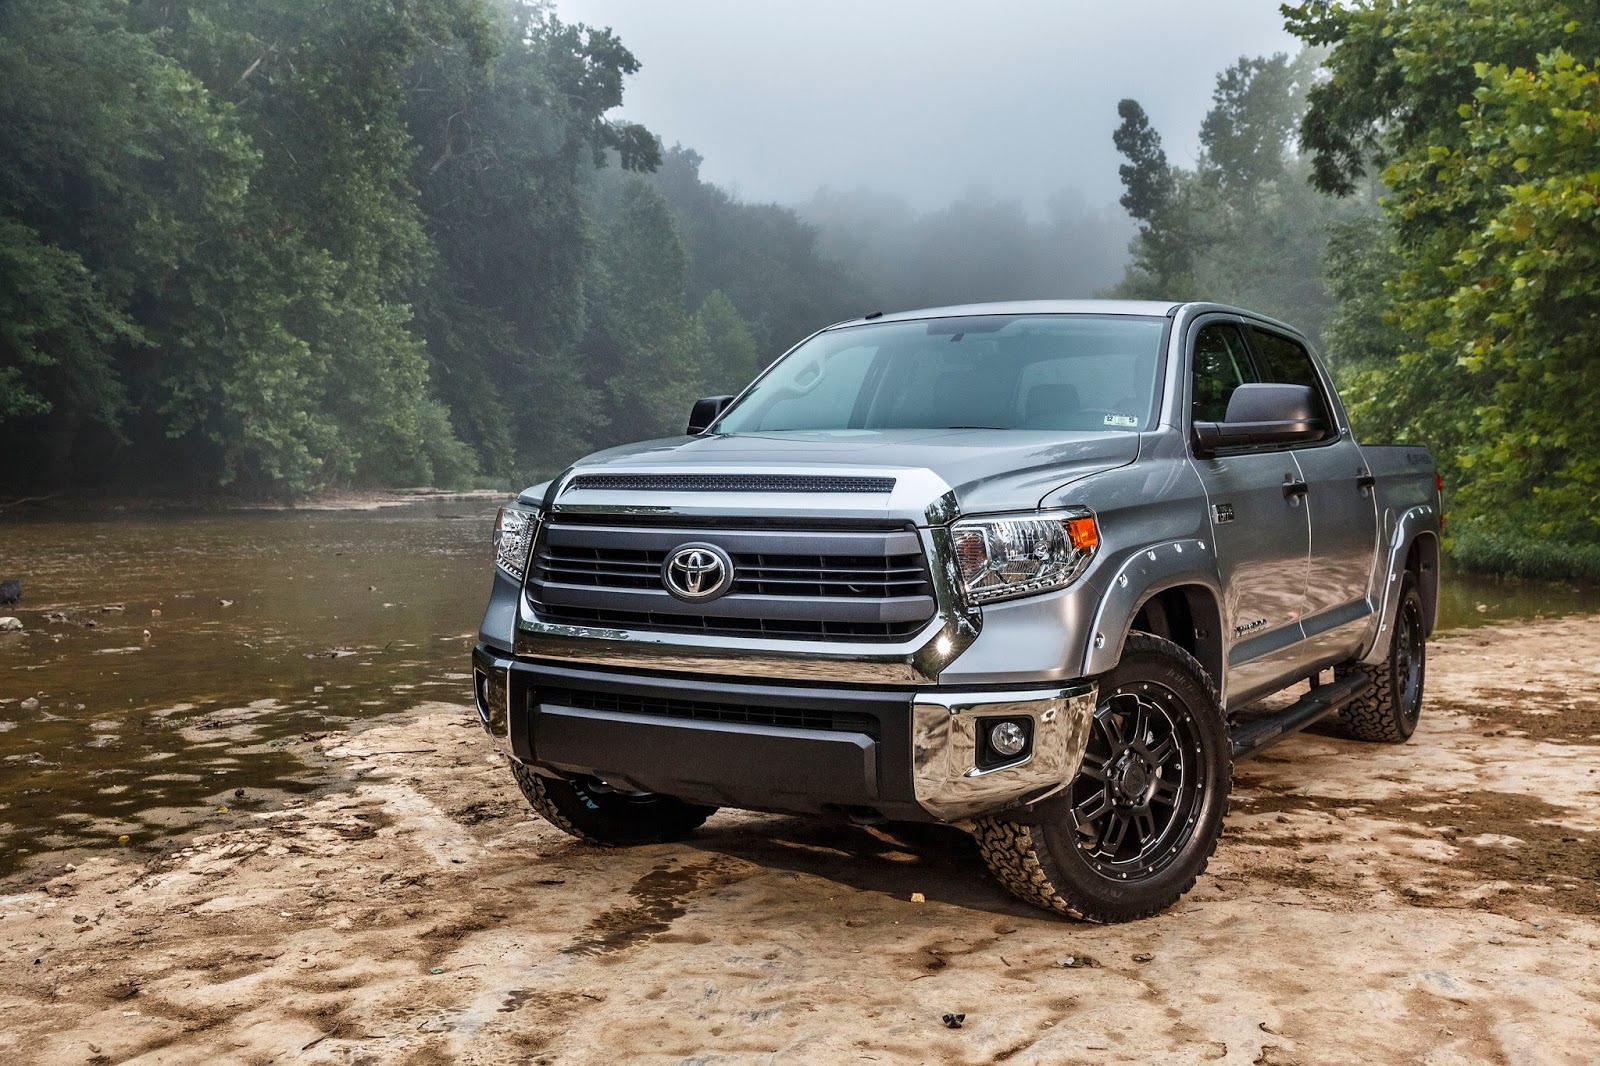 166New Look 2014 toyota tundra lug nut torque specs for Android Wallpaper